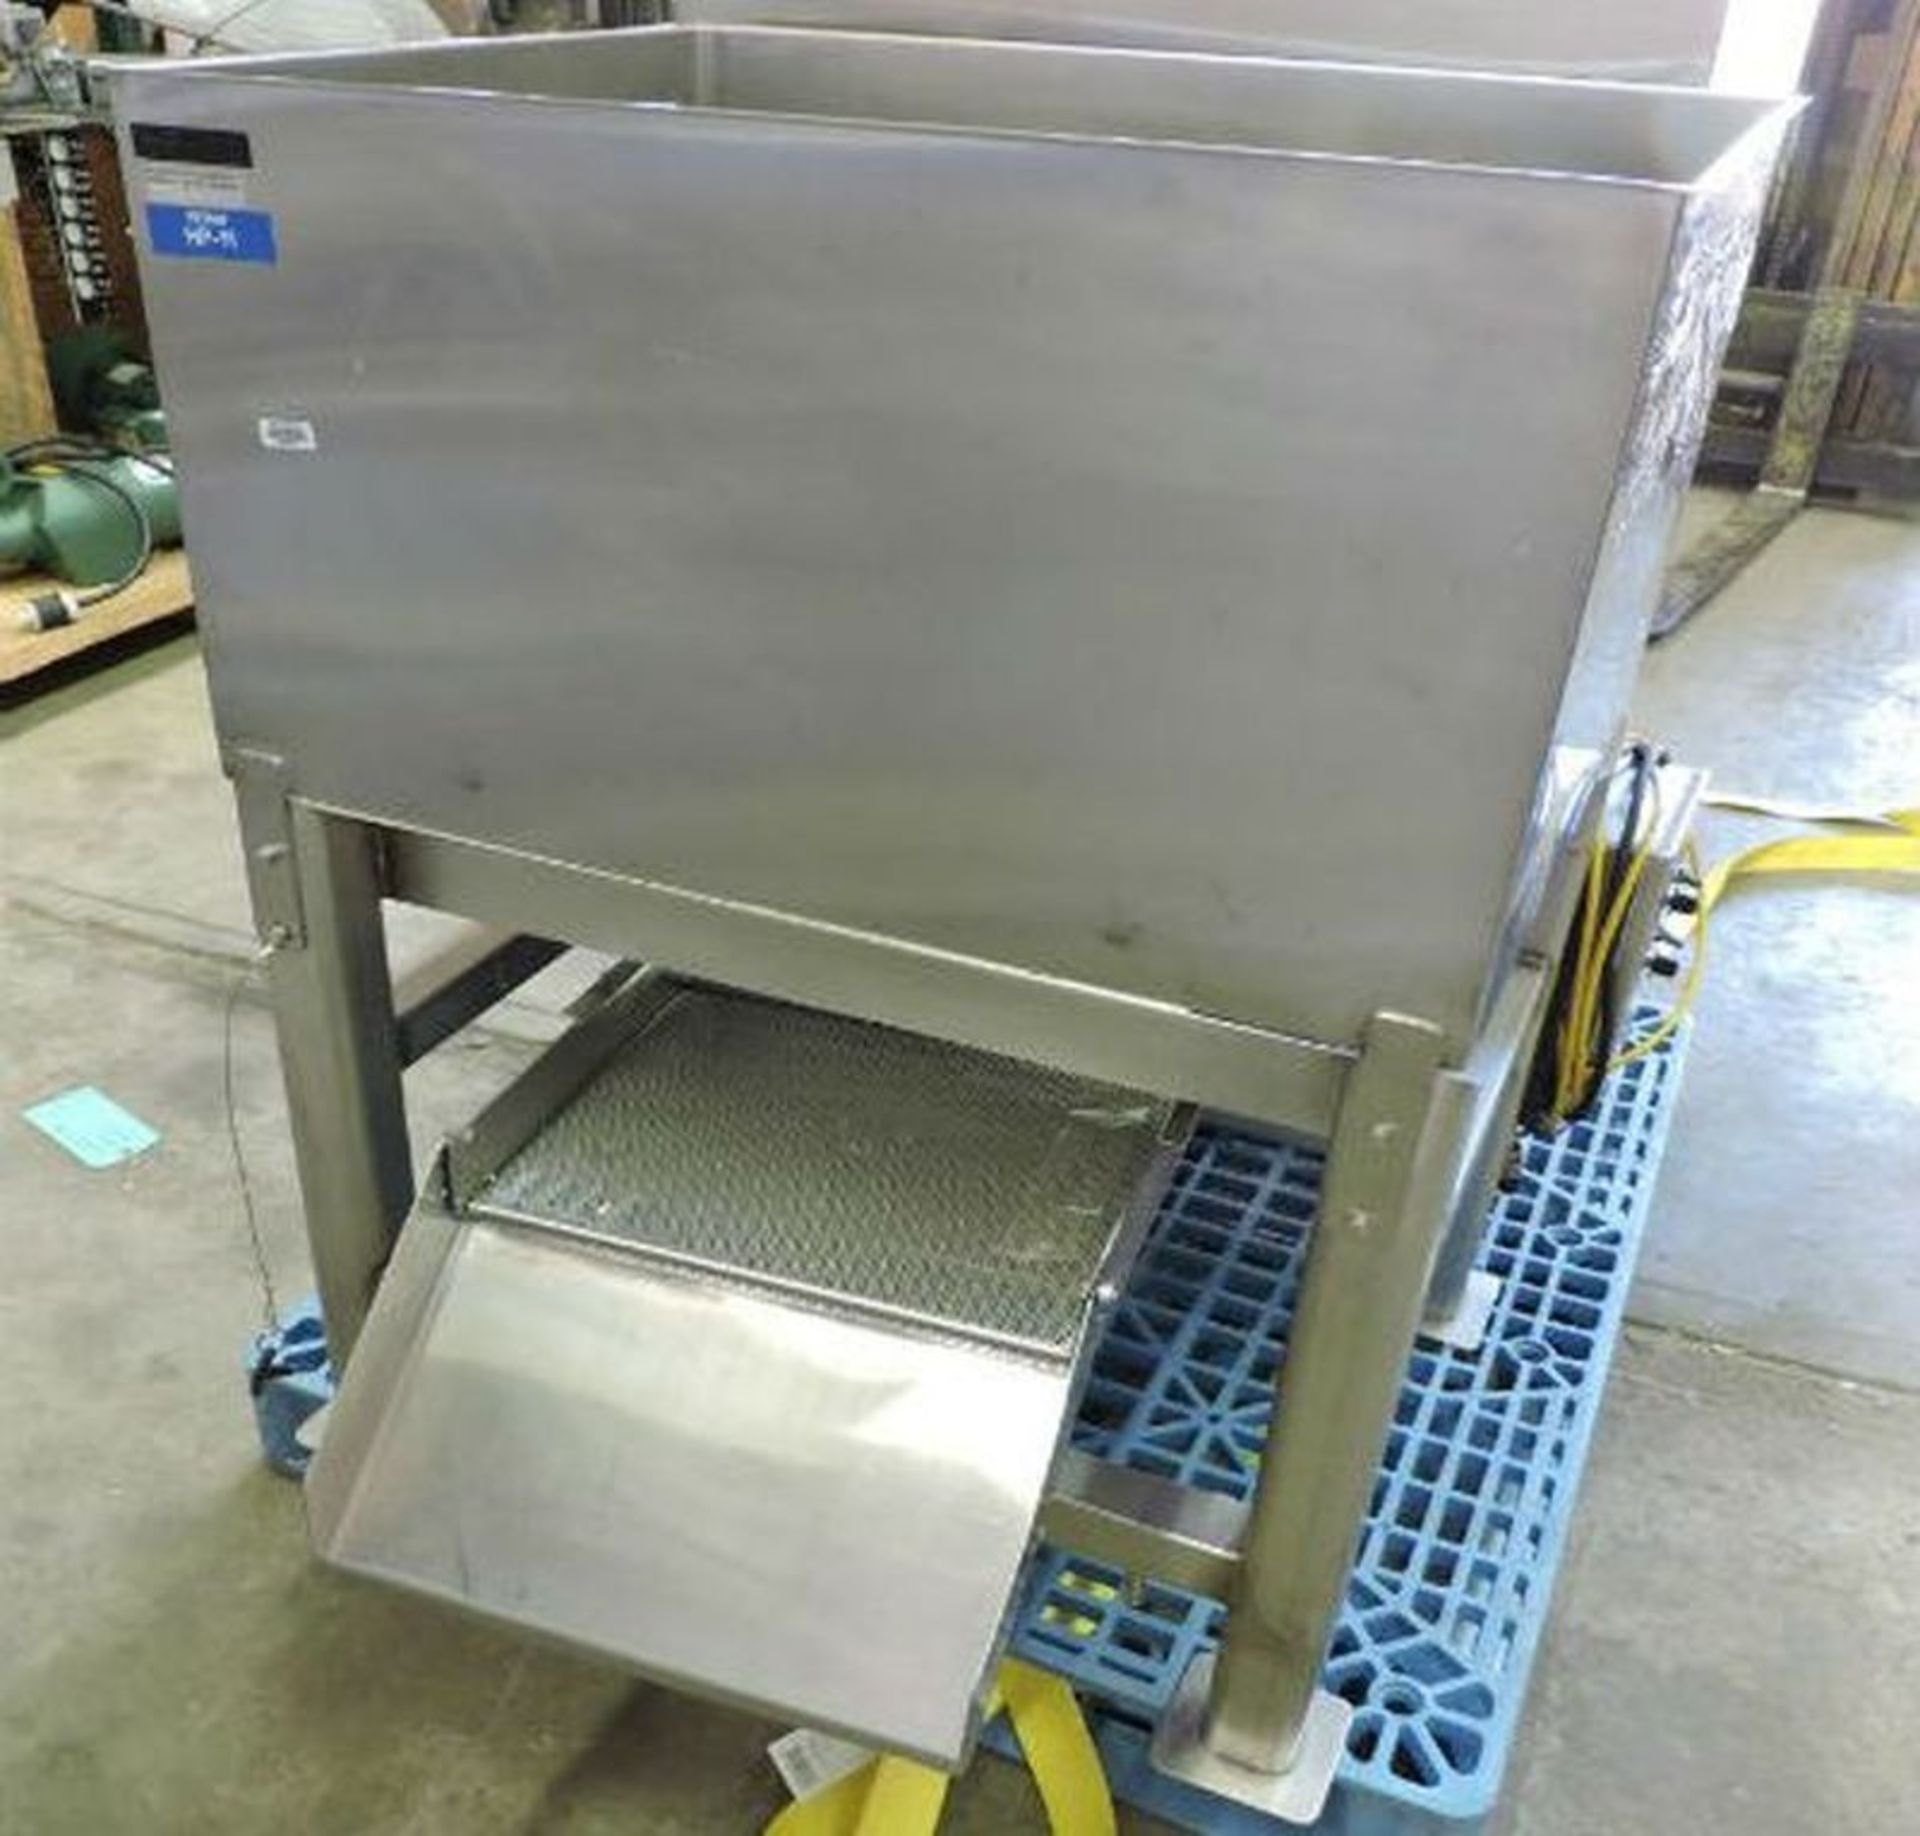 Stainless Steel Vibratory Feeder - NO RESERVE - Vibratory Feeders. Hopper Size: 23" X 29" X 17"